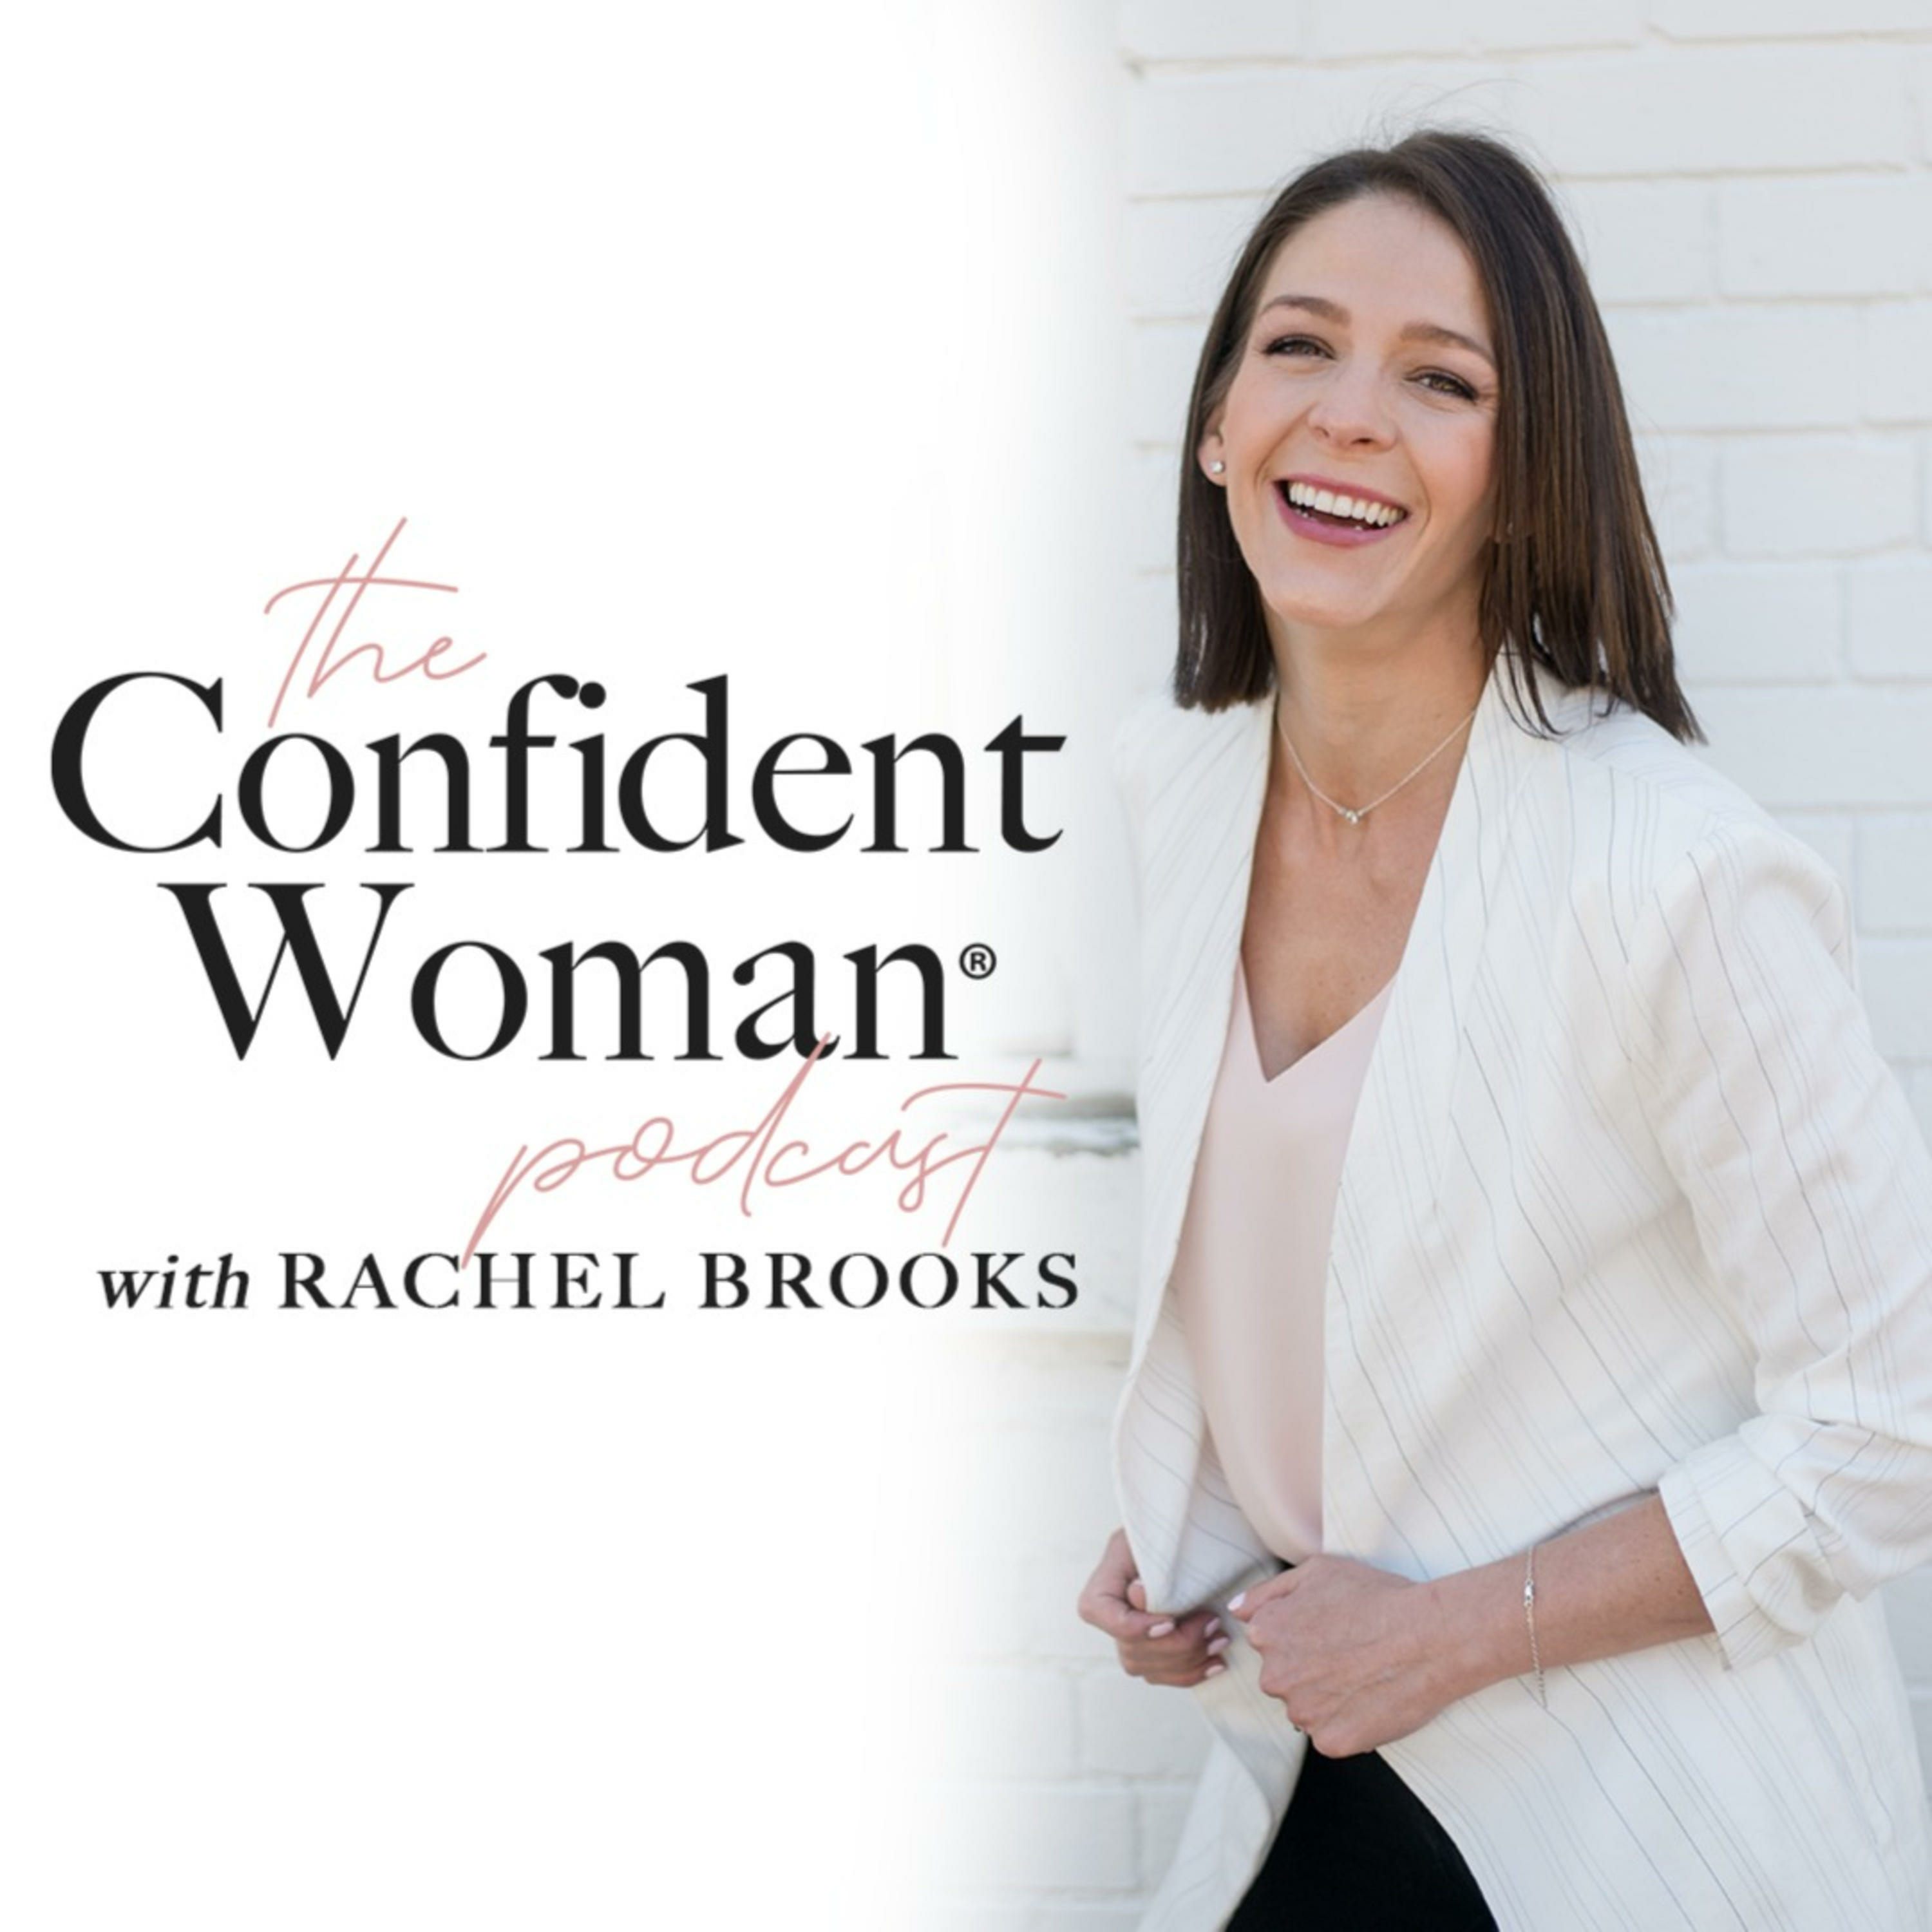 127: Reinventing Your Life, One Step at a Time, with Sonya Morton - Firth